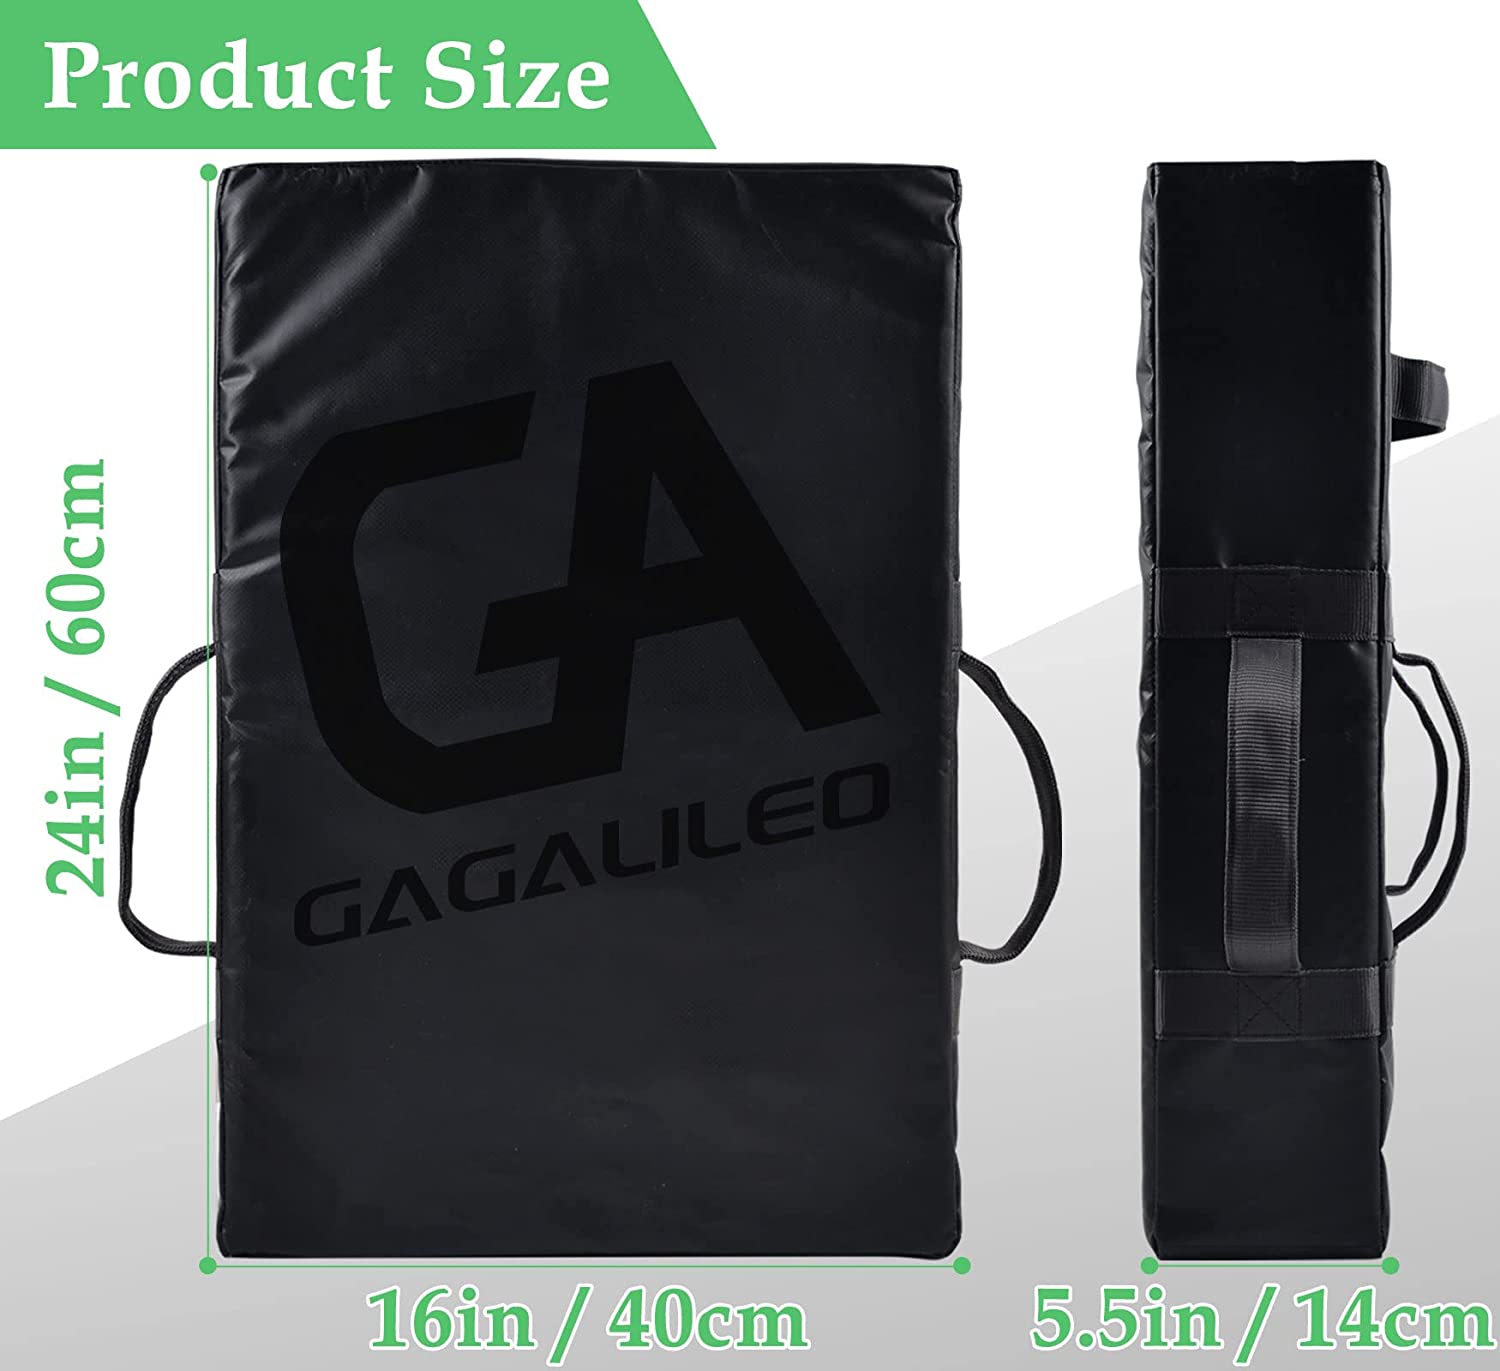 Gagalileo Bloking Pad,Maximize Your Training Multi-Sport Blocking Pad - Durable Synthetic Leather, High-Density Foam Core, 24x16in